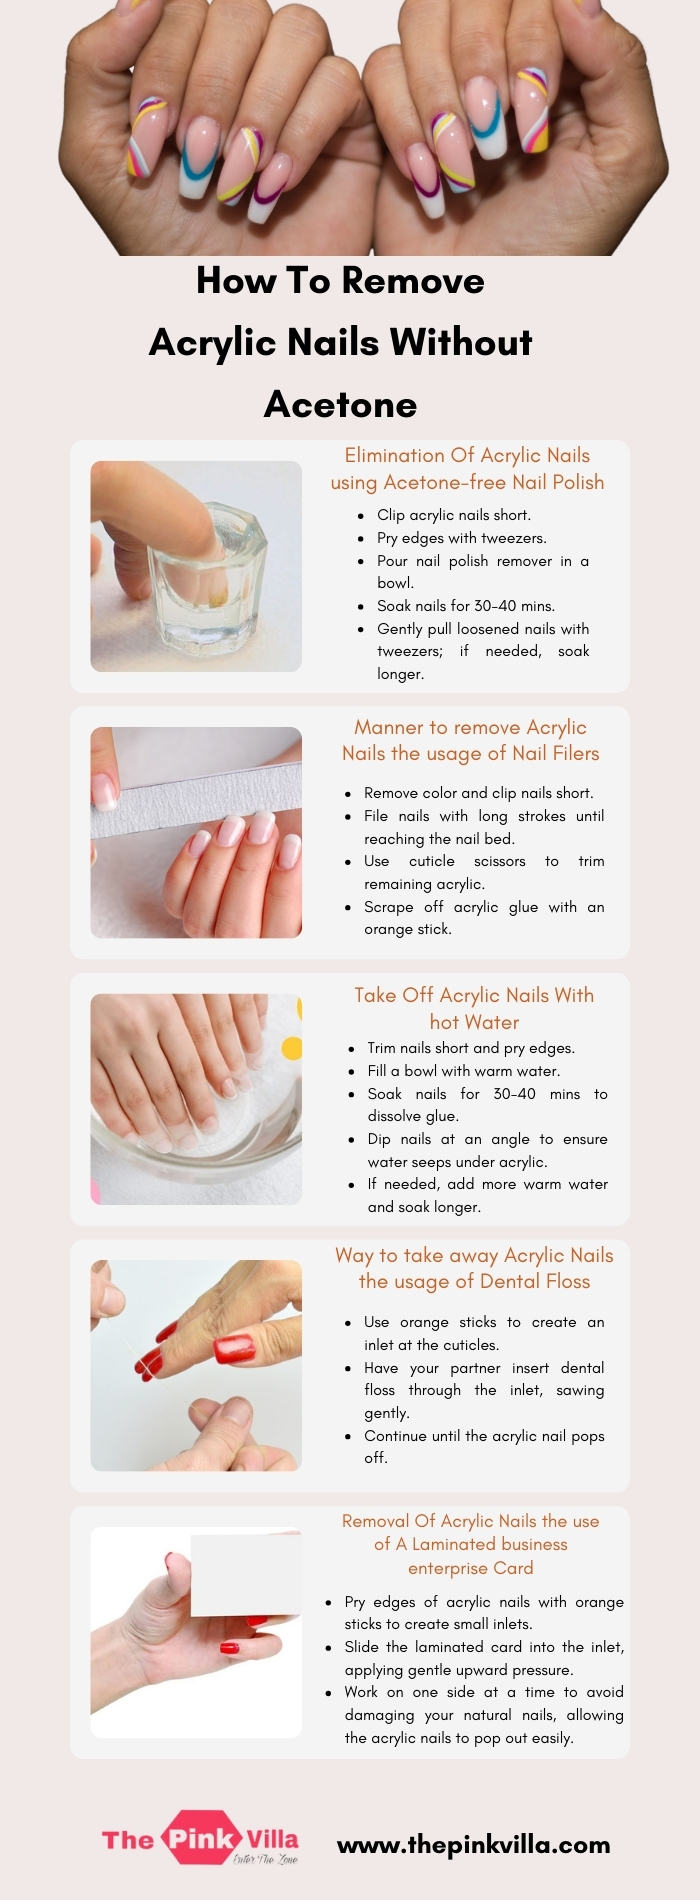 How To Remove Acrylic Nails Without Acetone